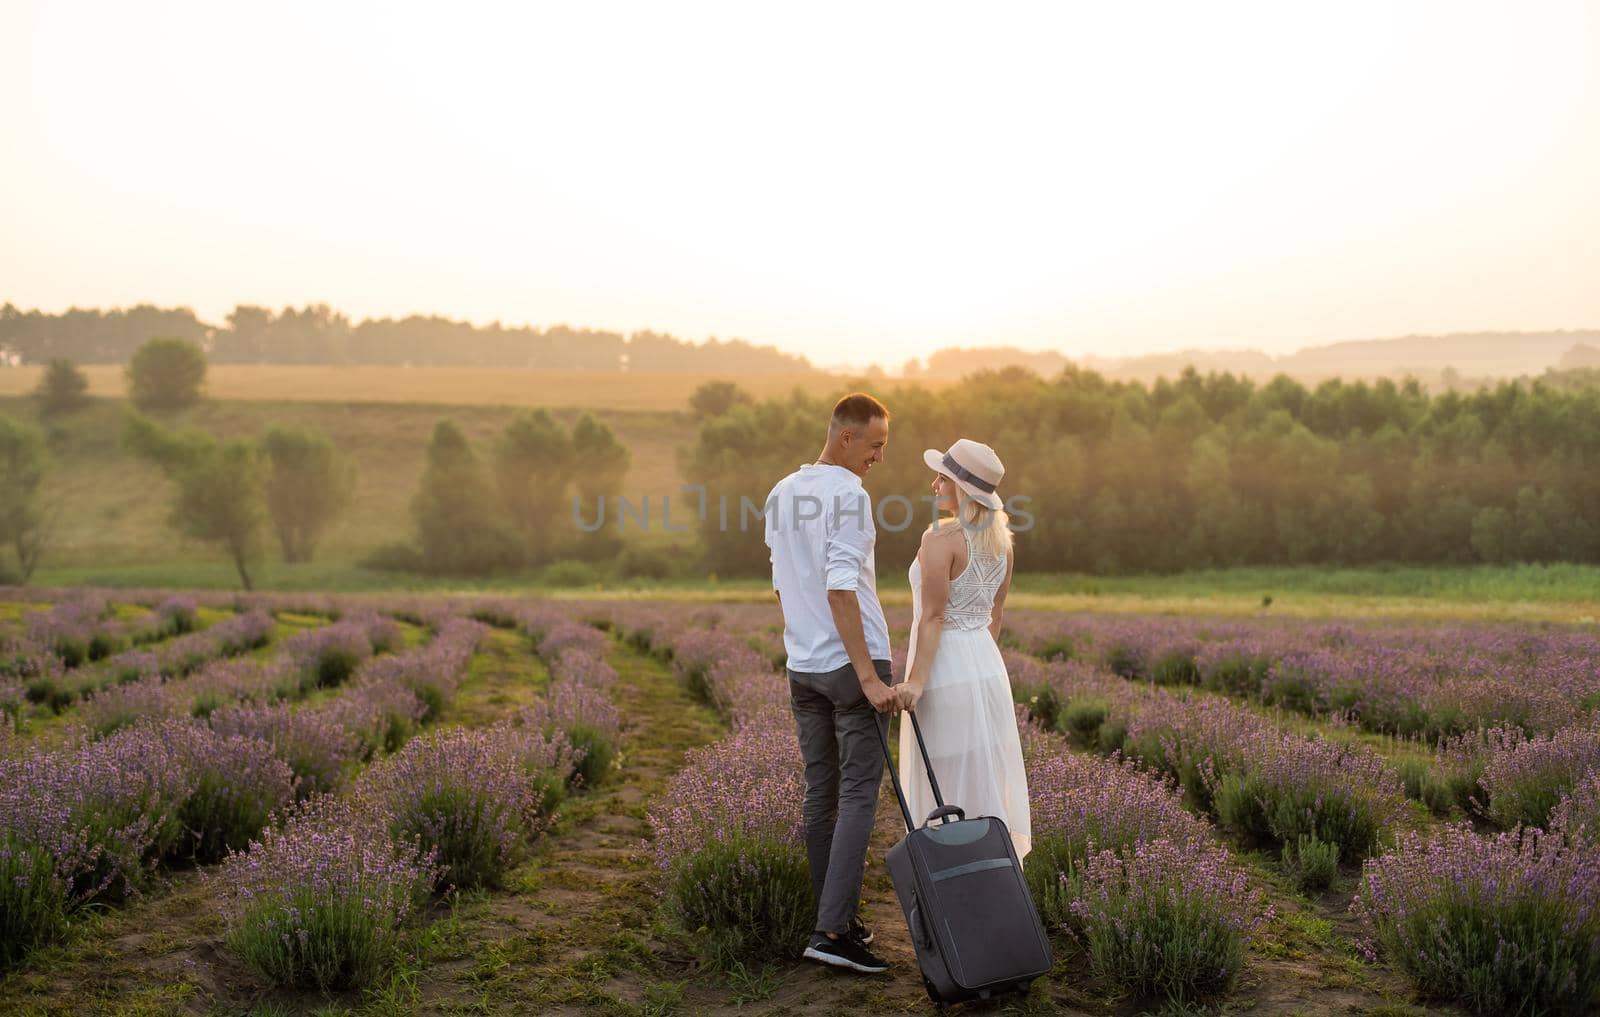 man and woman with suitcase in lavender field.